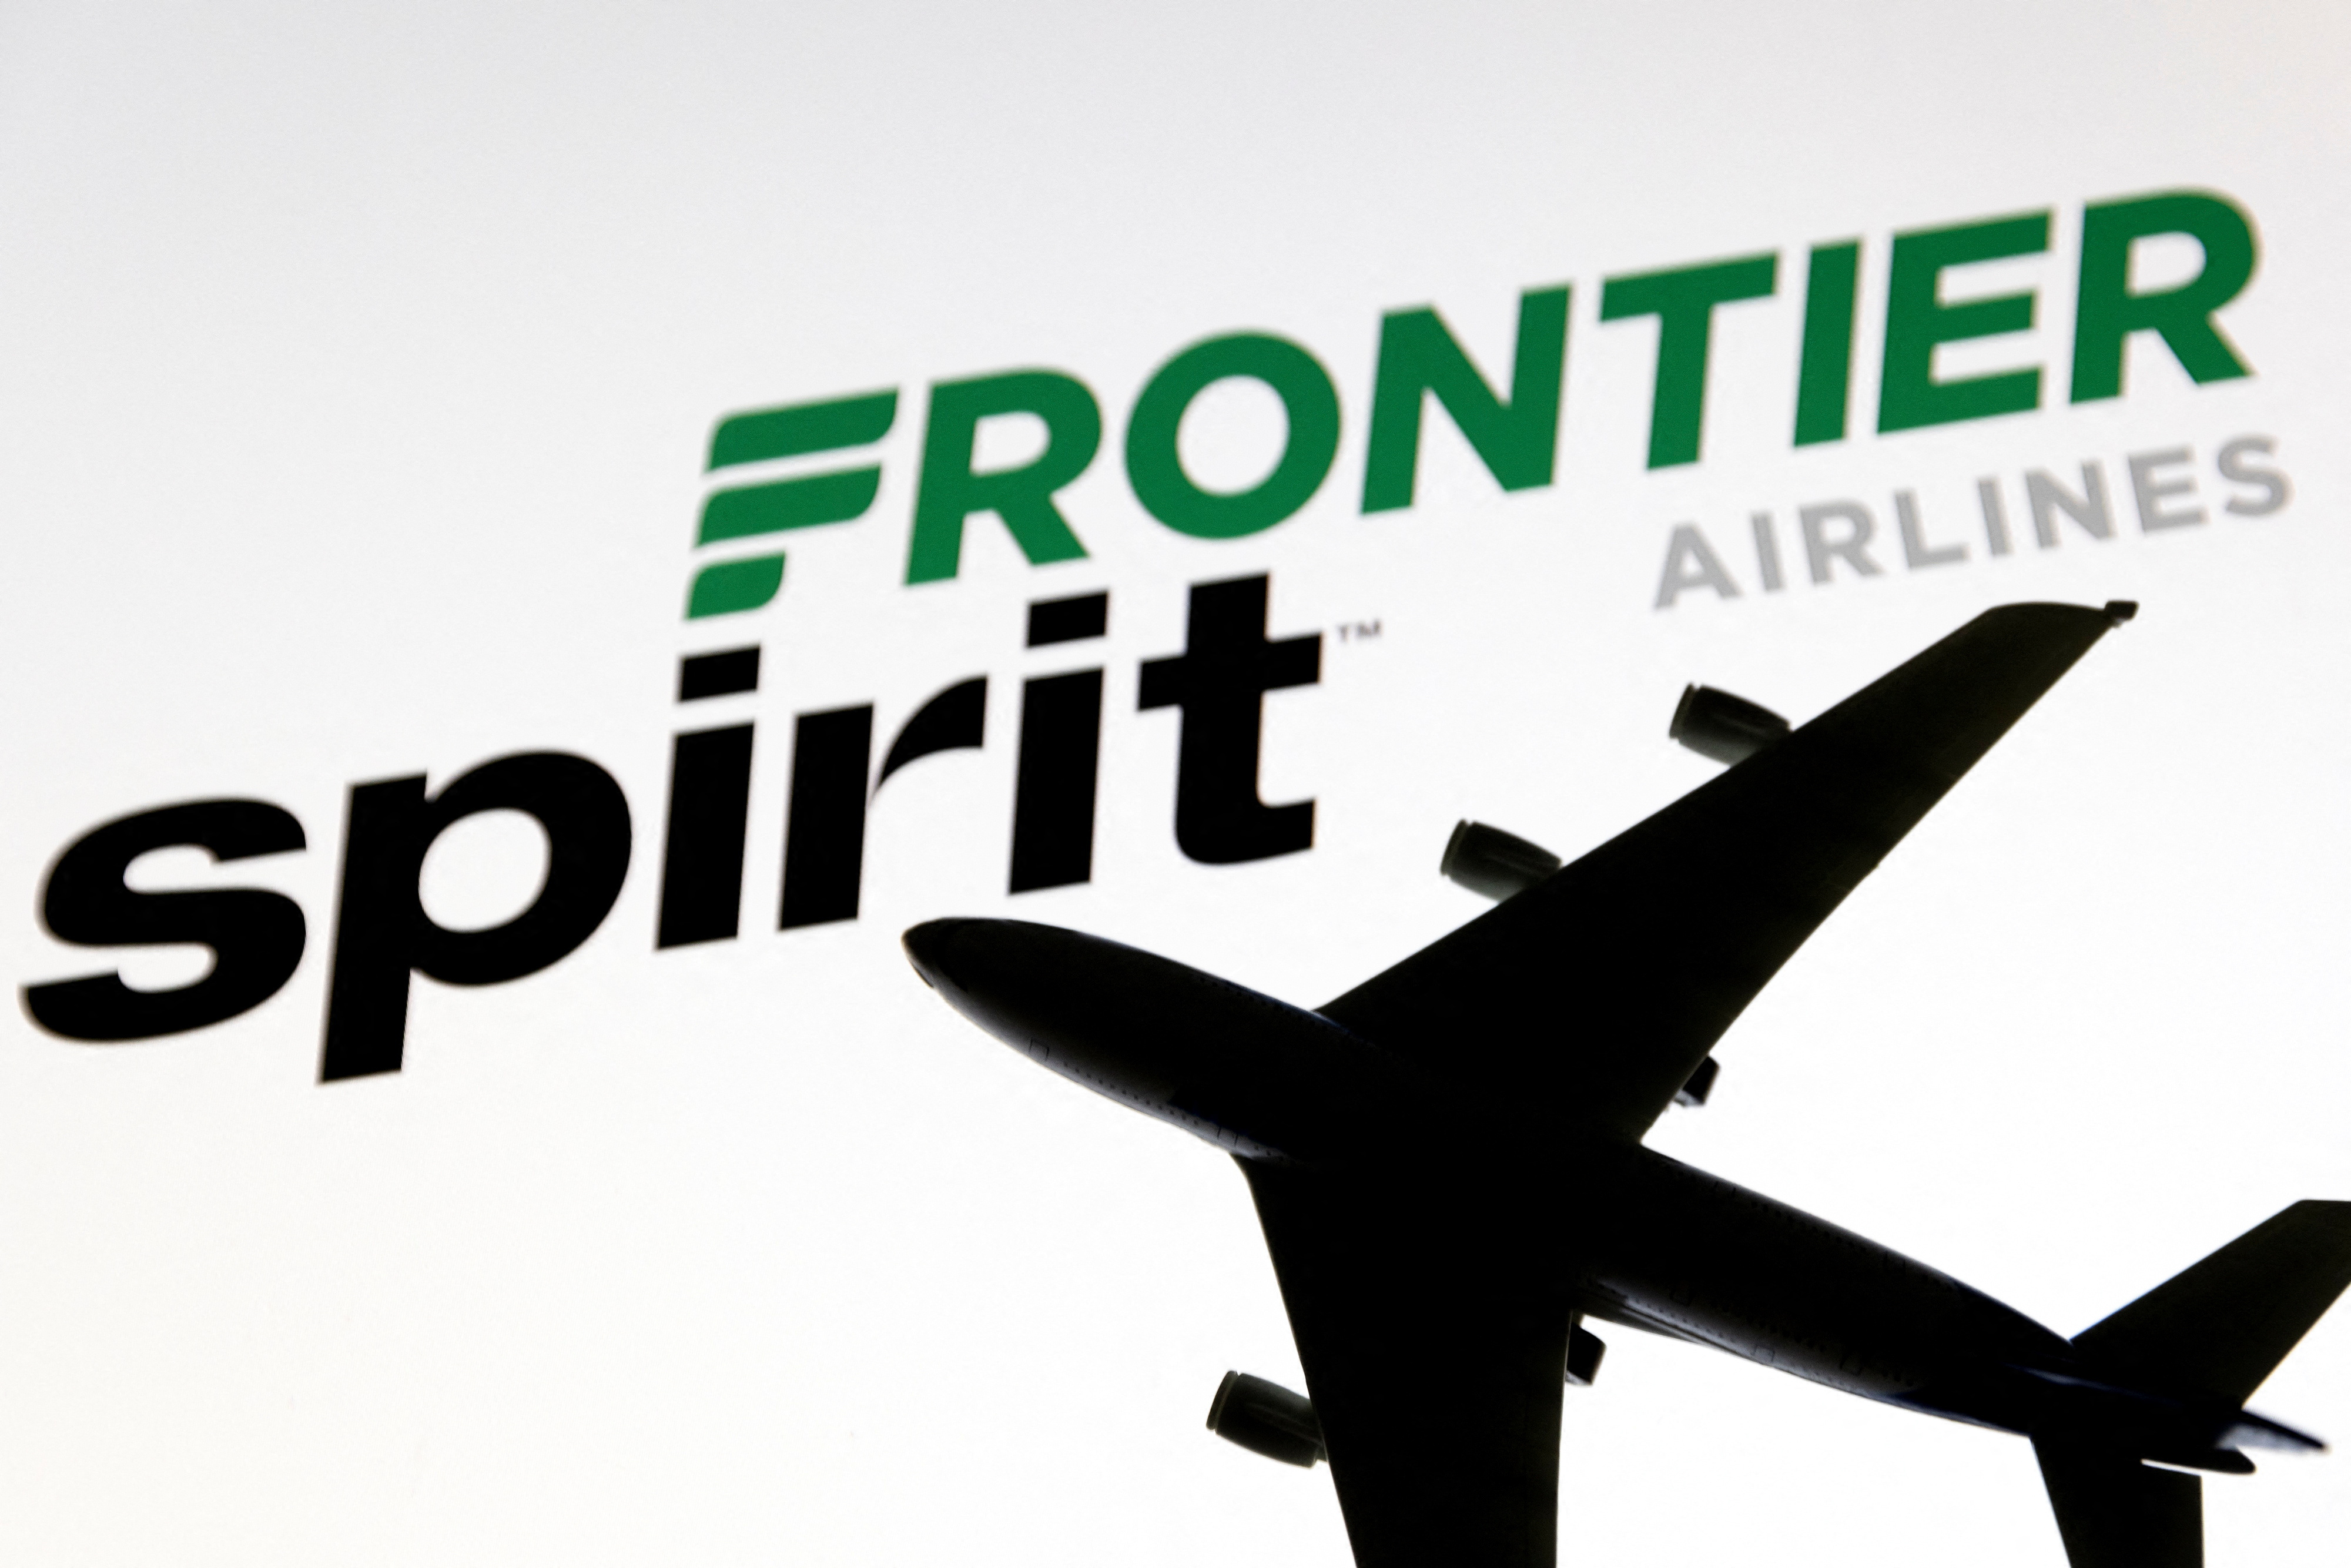 Illustration shows Spirit and Frontier Airlines logos